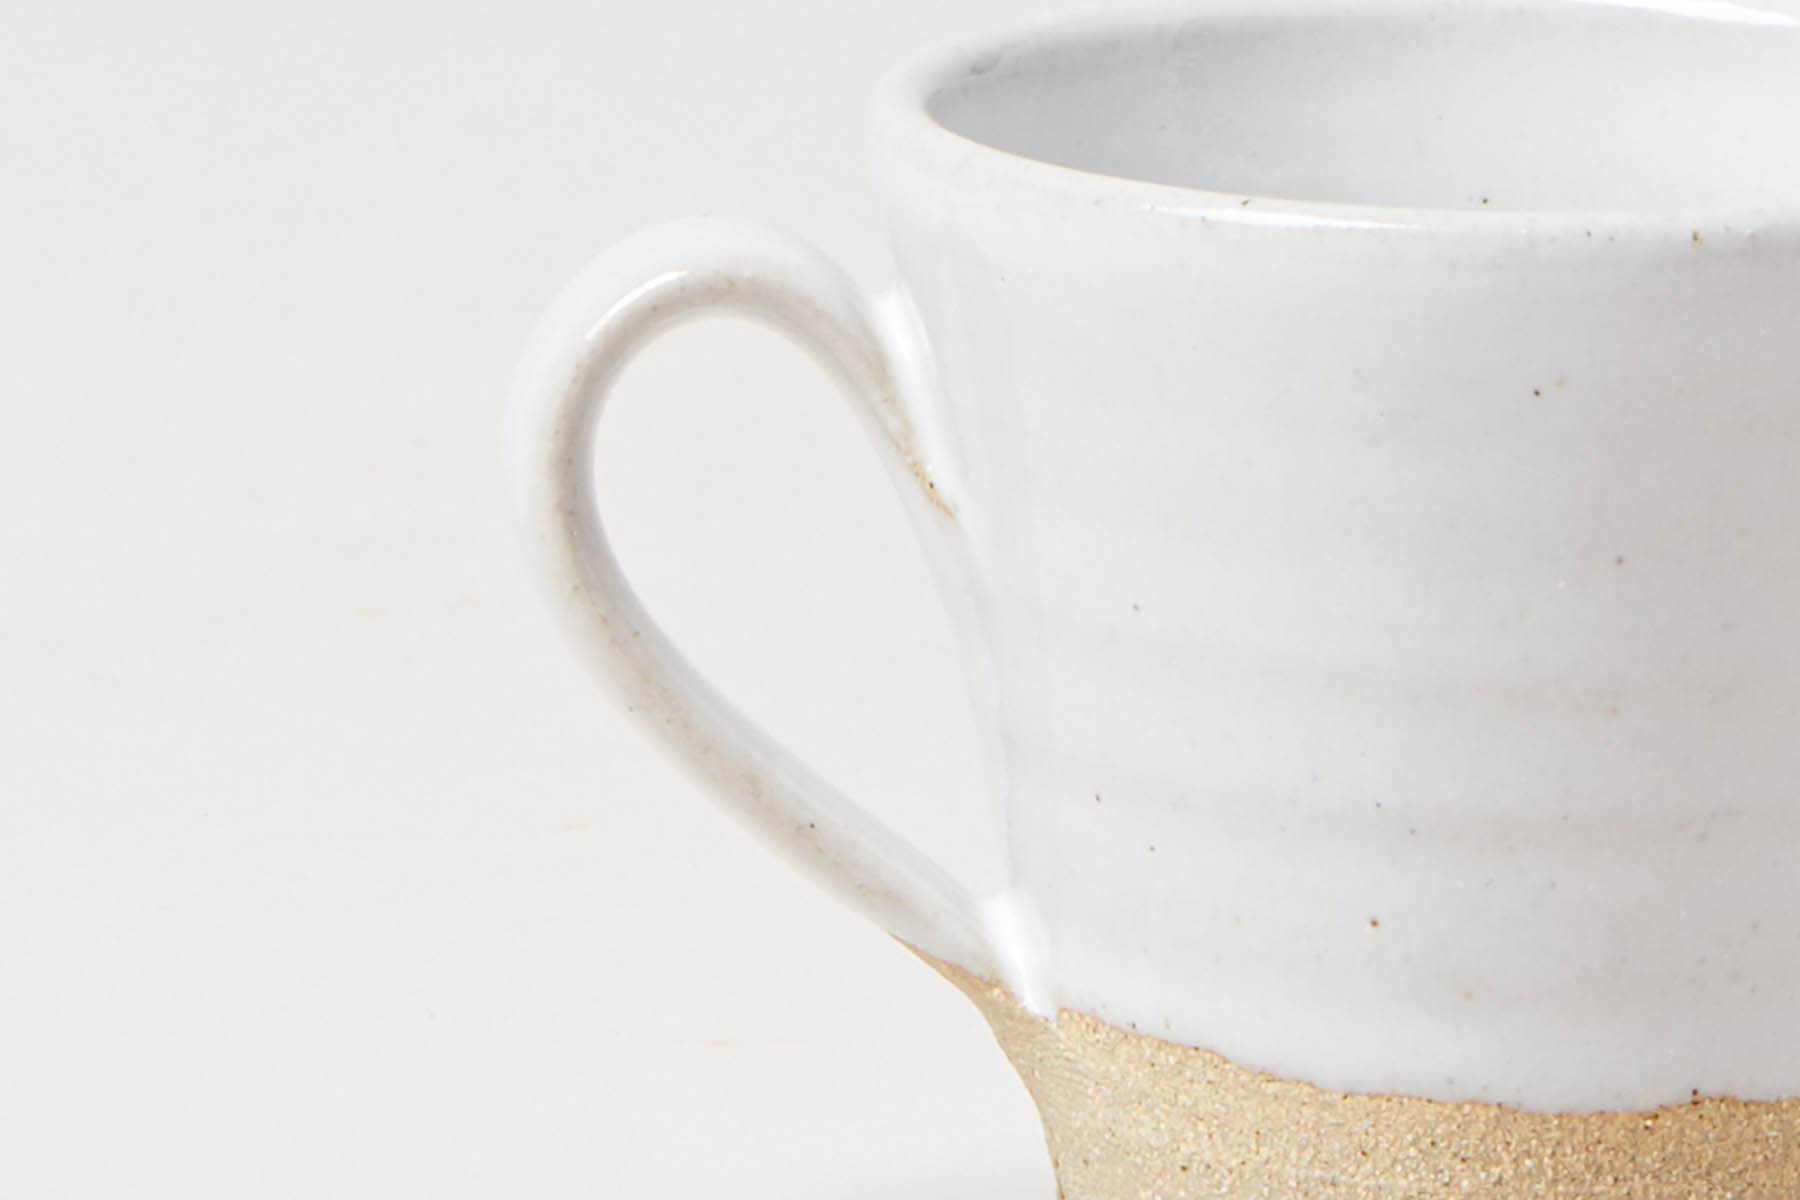 White Modern Pottery Espresso Coffee Cup 70 ml / 2.3 oz – Mad About Pottery